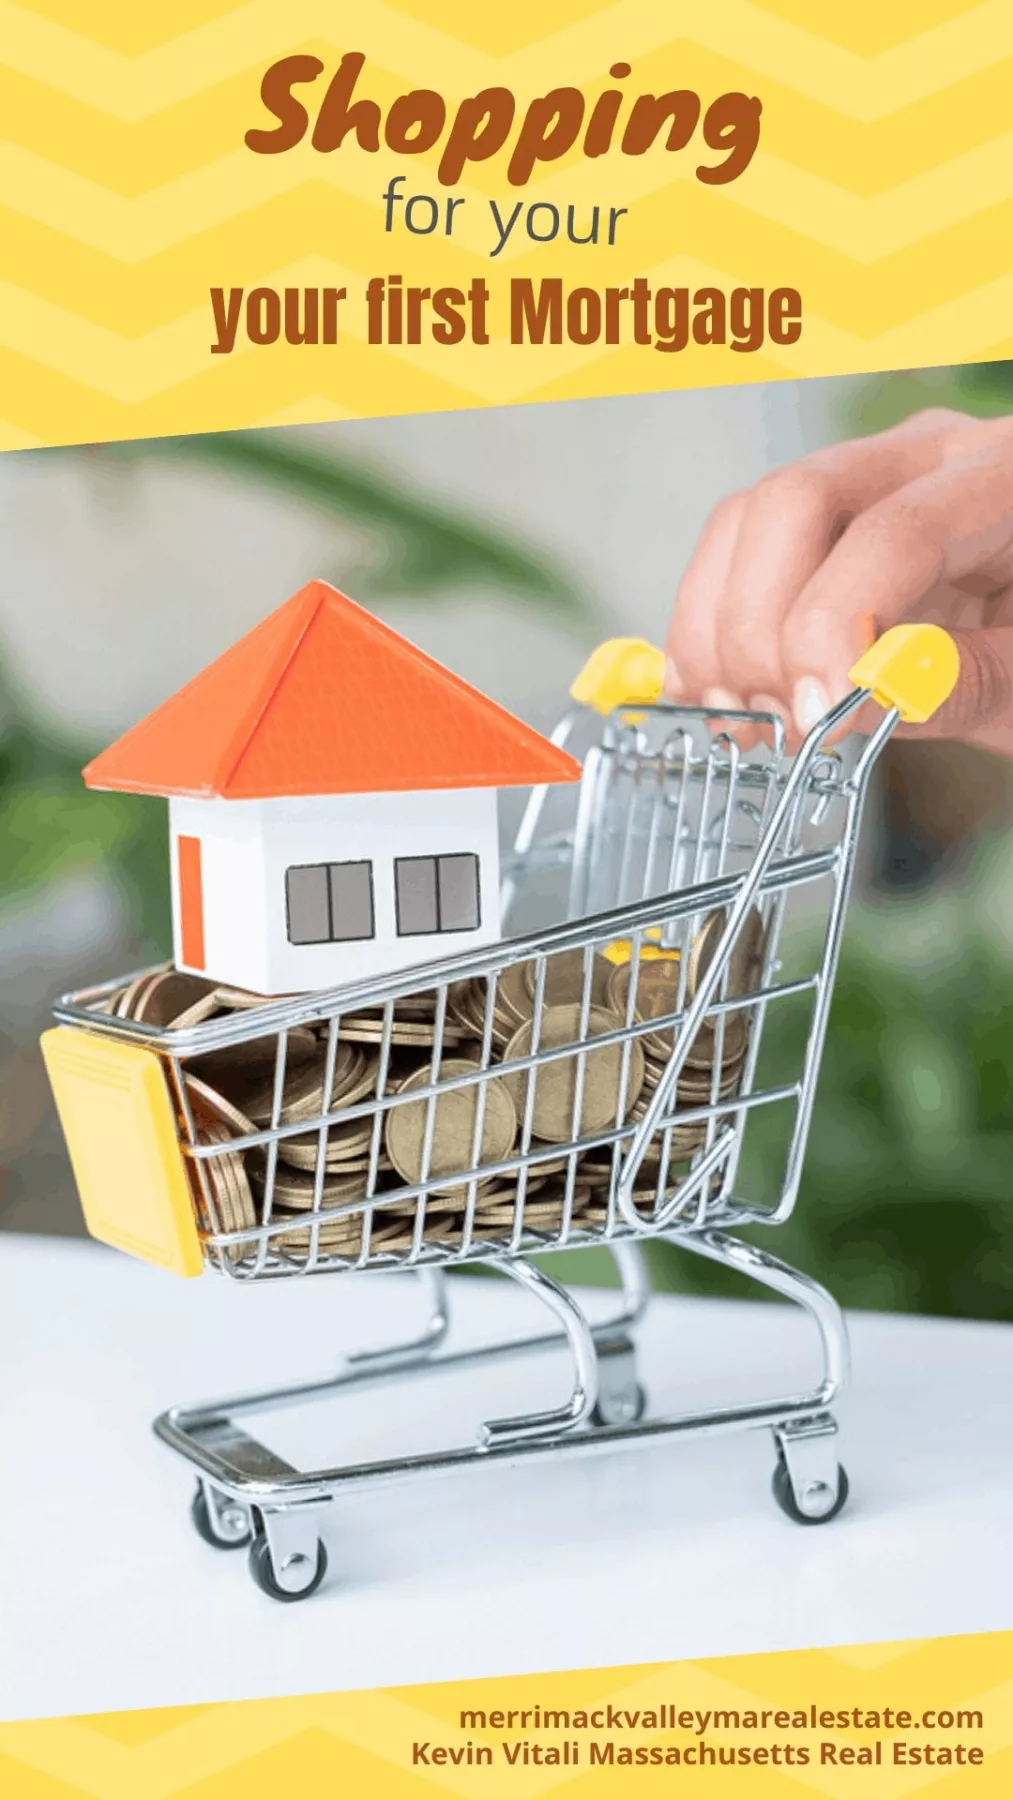 shopping for a mortgage- Advice from a Masschusetts Buyer's Agent